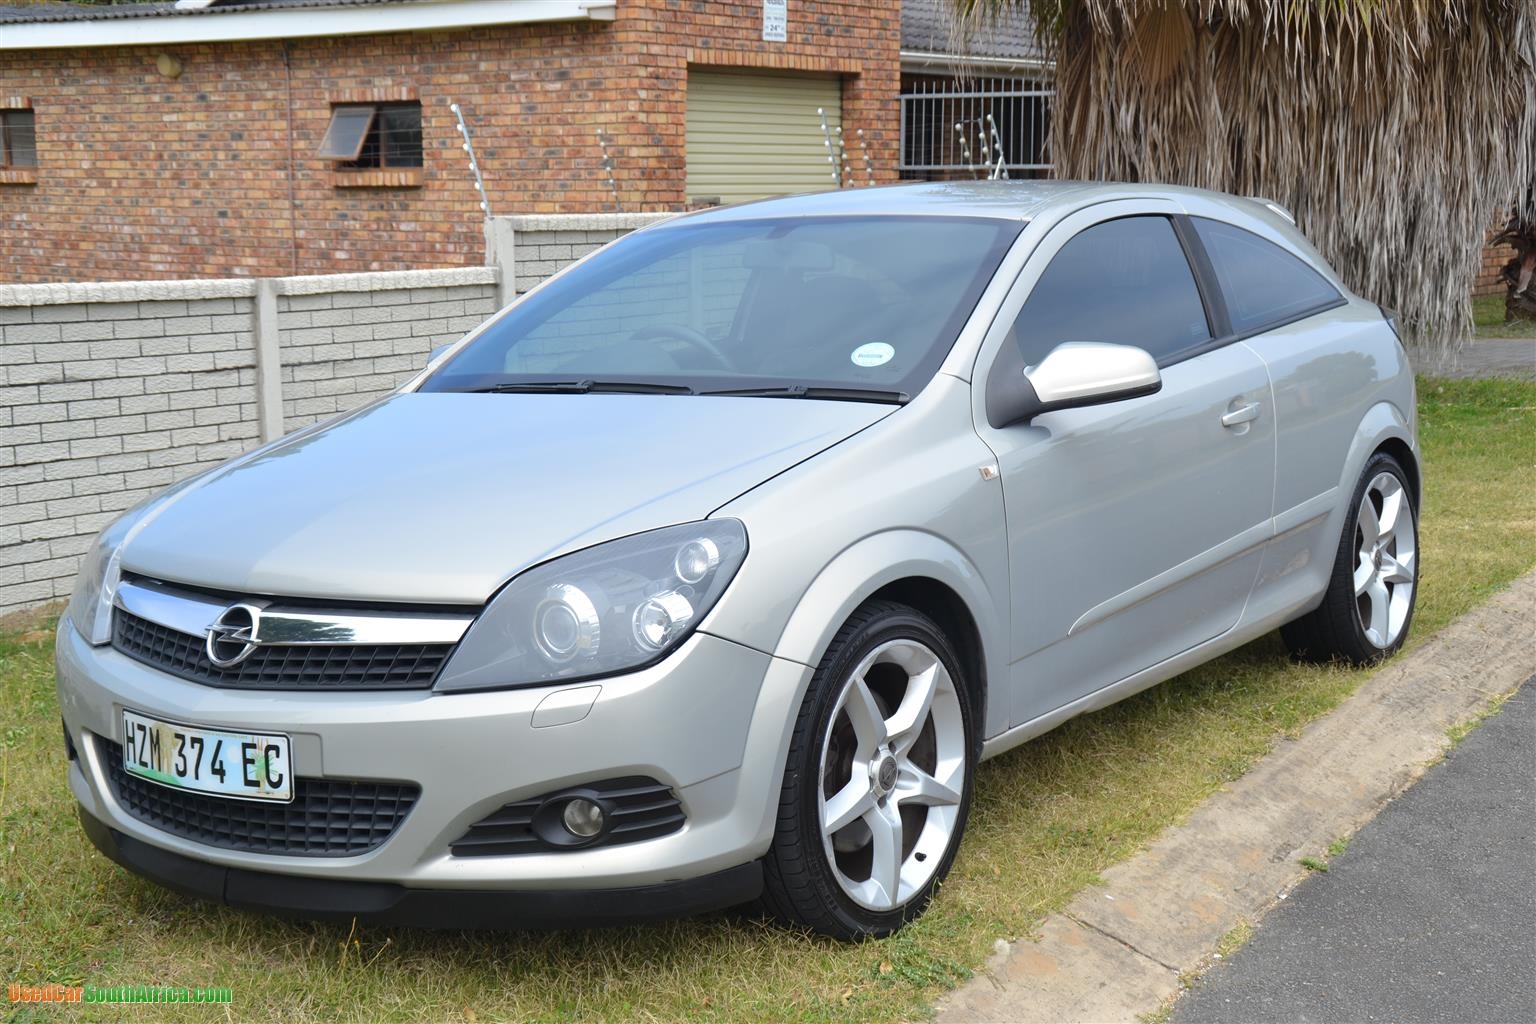 1999 Opel Astra 2.0 used car for sale in Somerset West Western Cape South Africa - OnlyCars.co.za